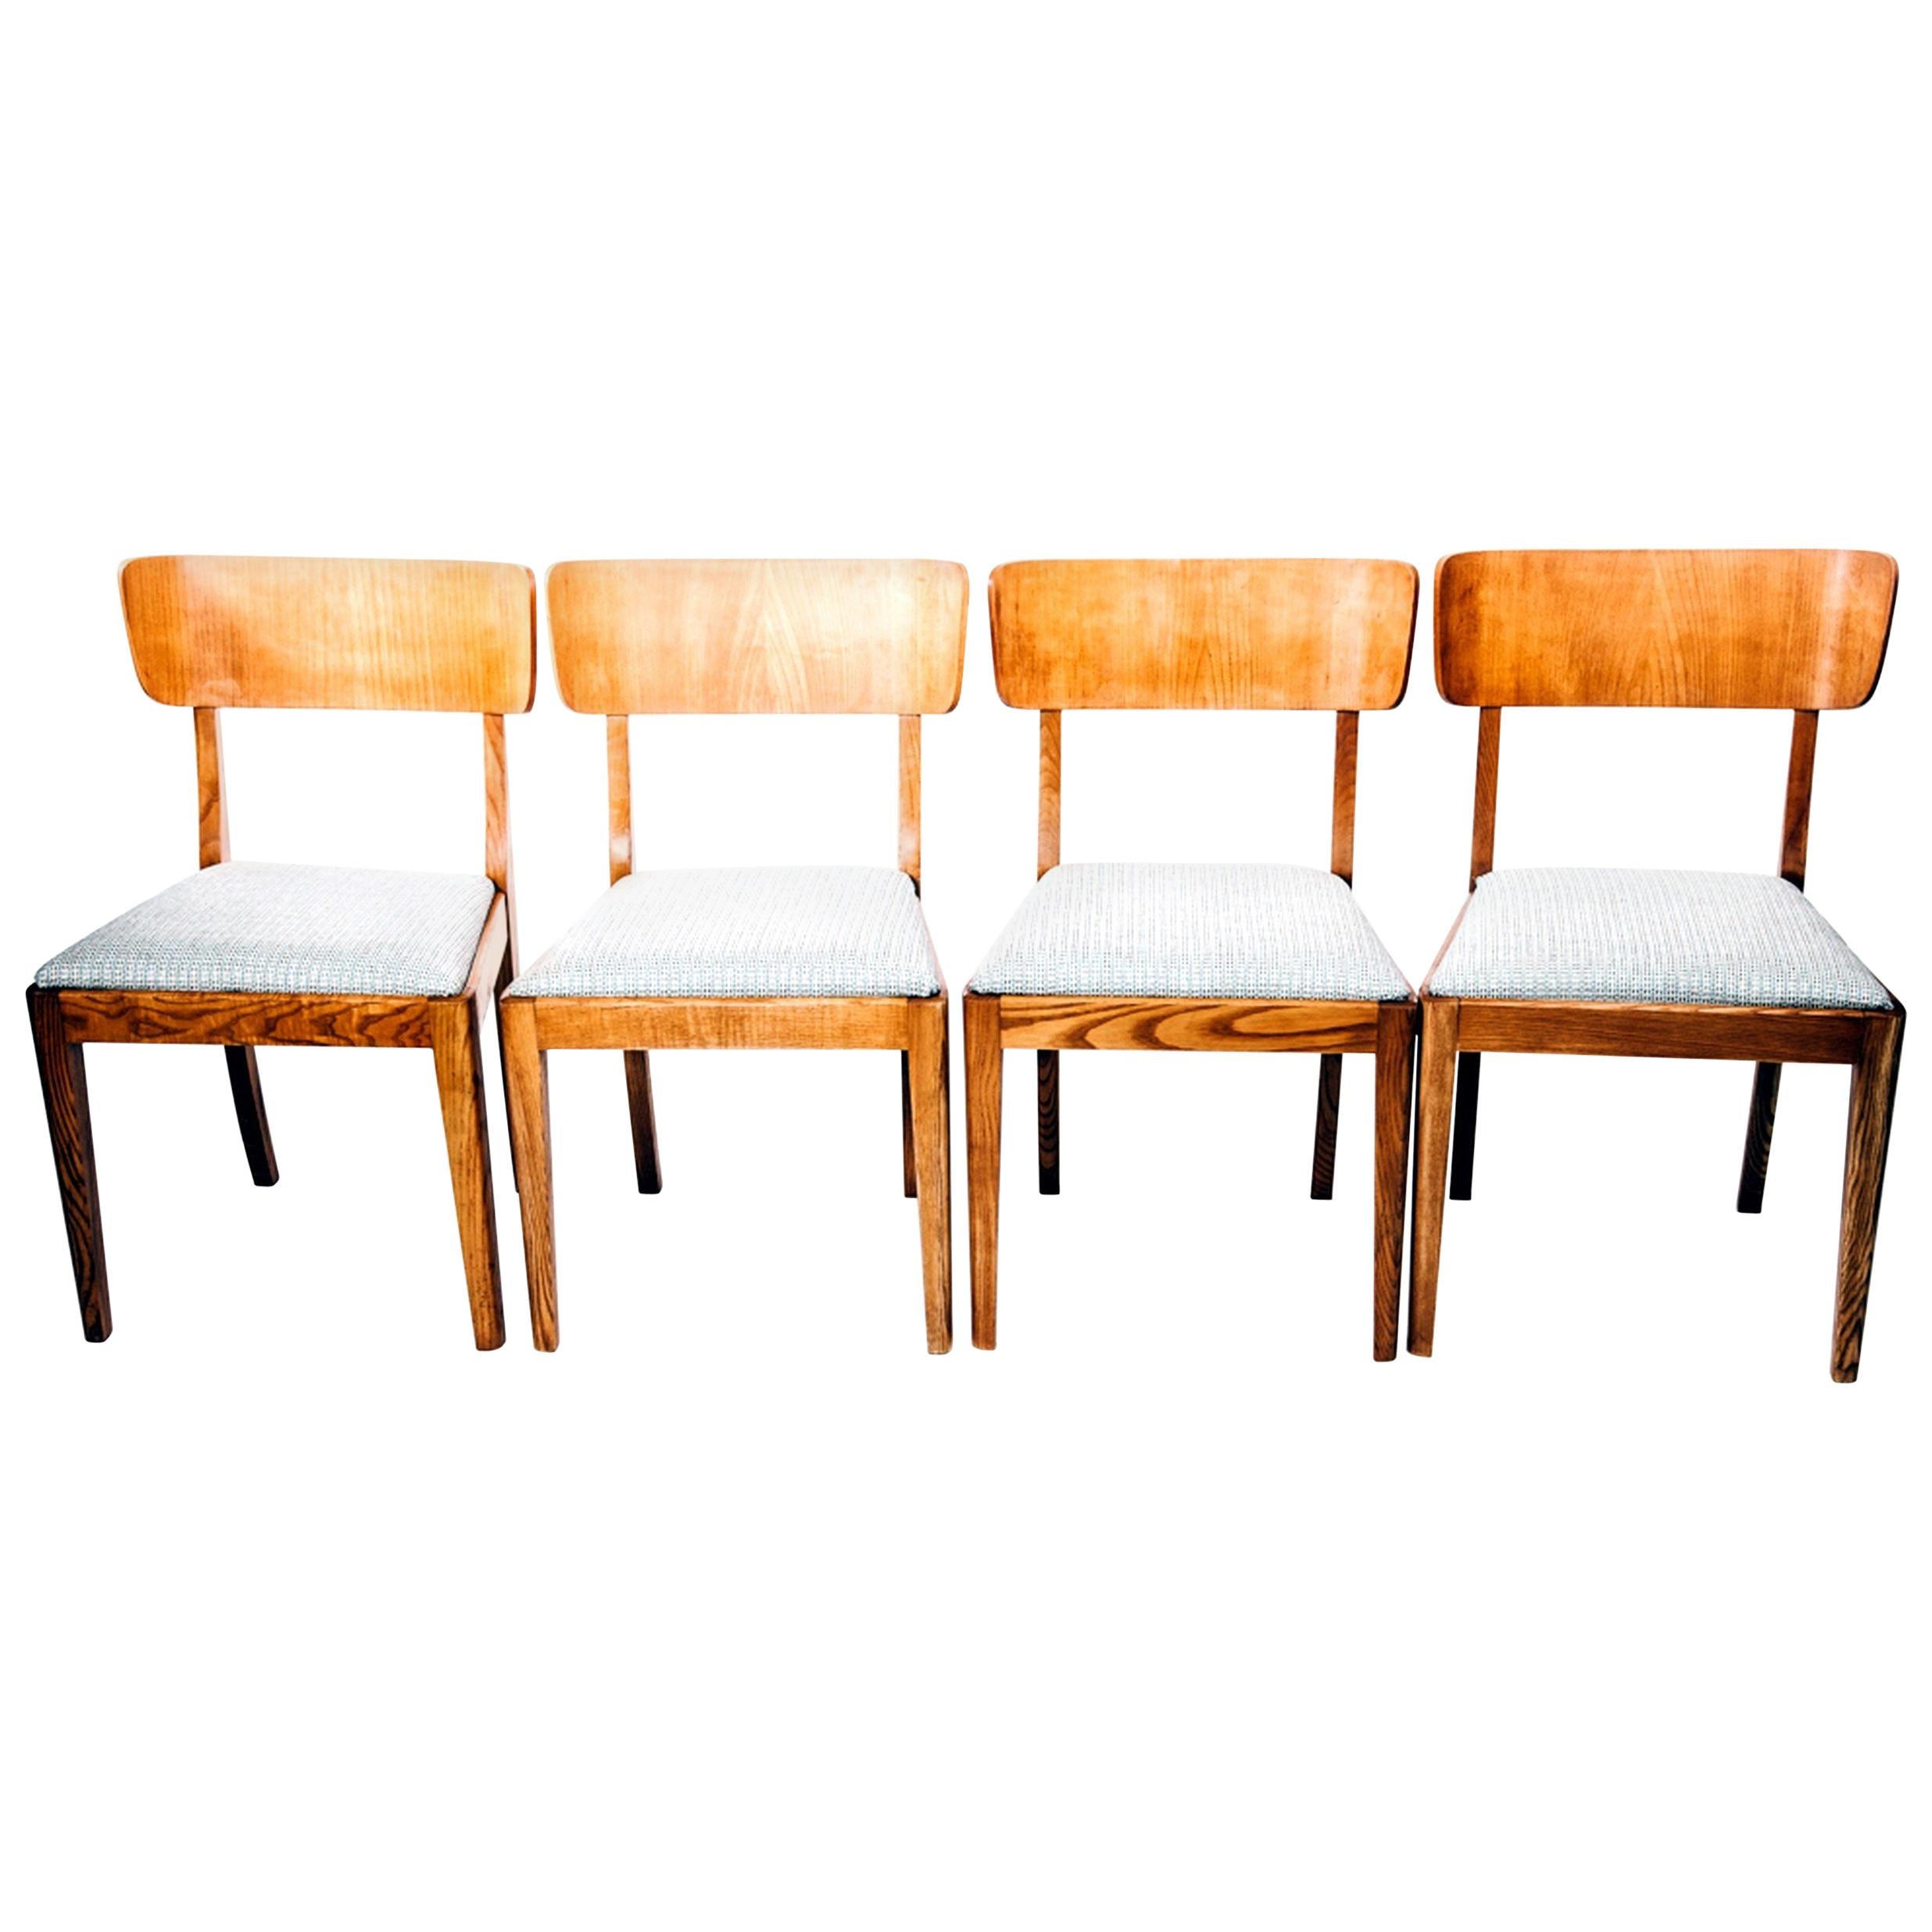 Swedish Midcentury Teak Chairs Set of Four, 1950s For Sale